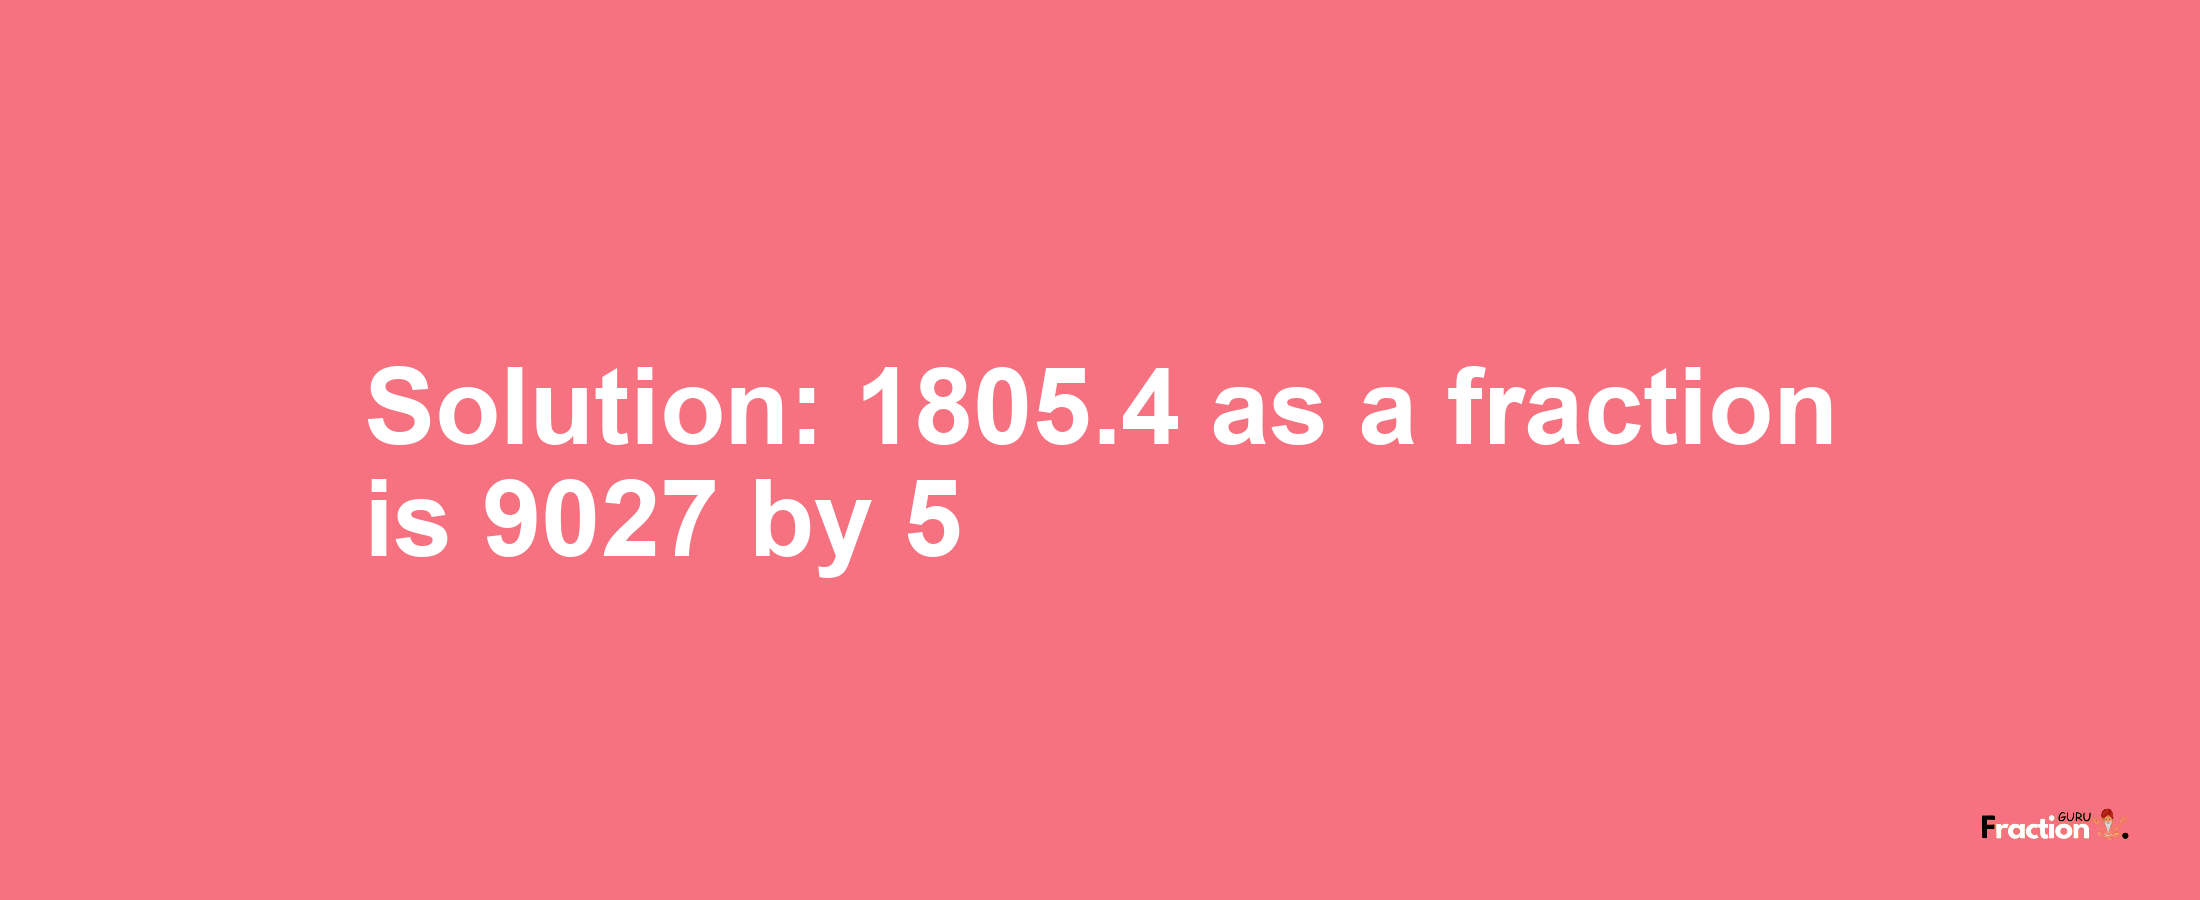 Solution:1805.4 as a fraction is 9027/5